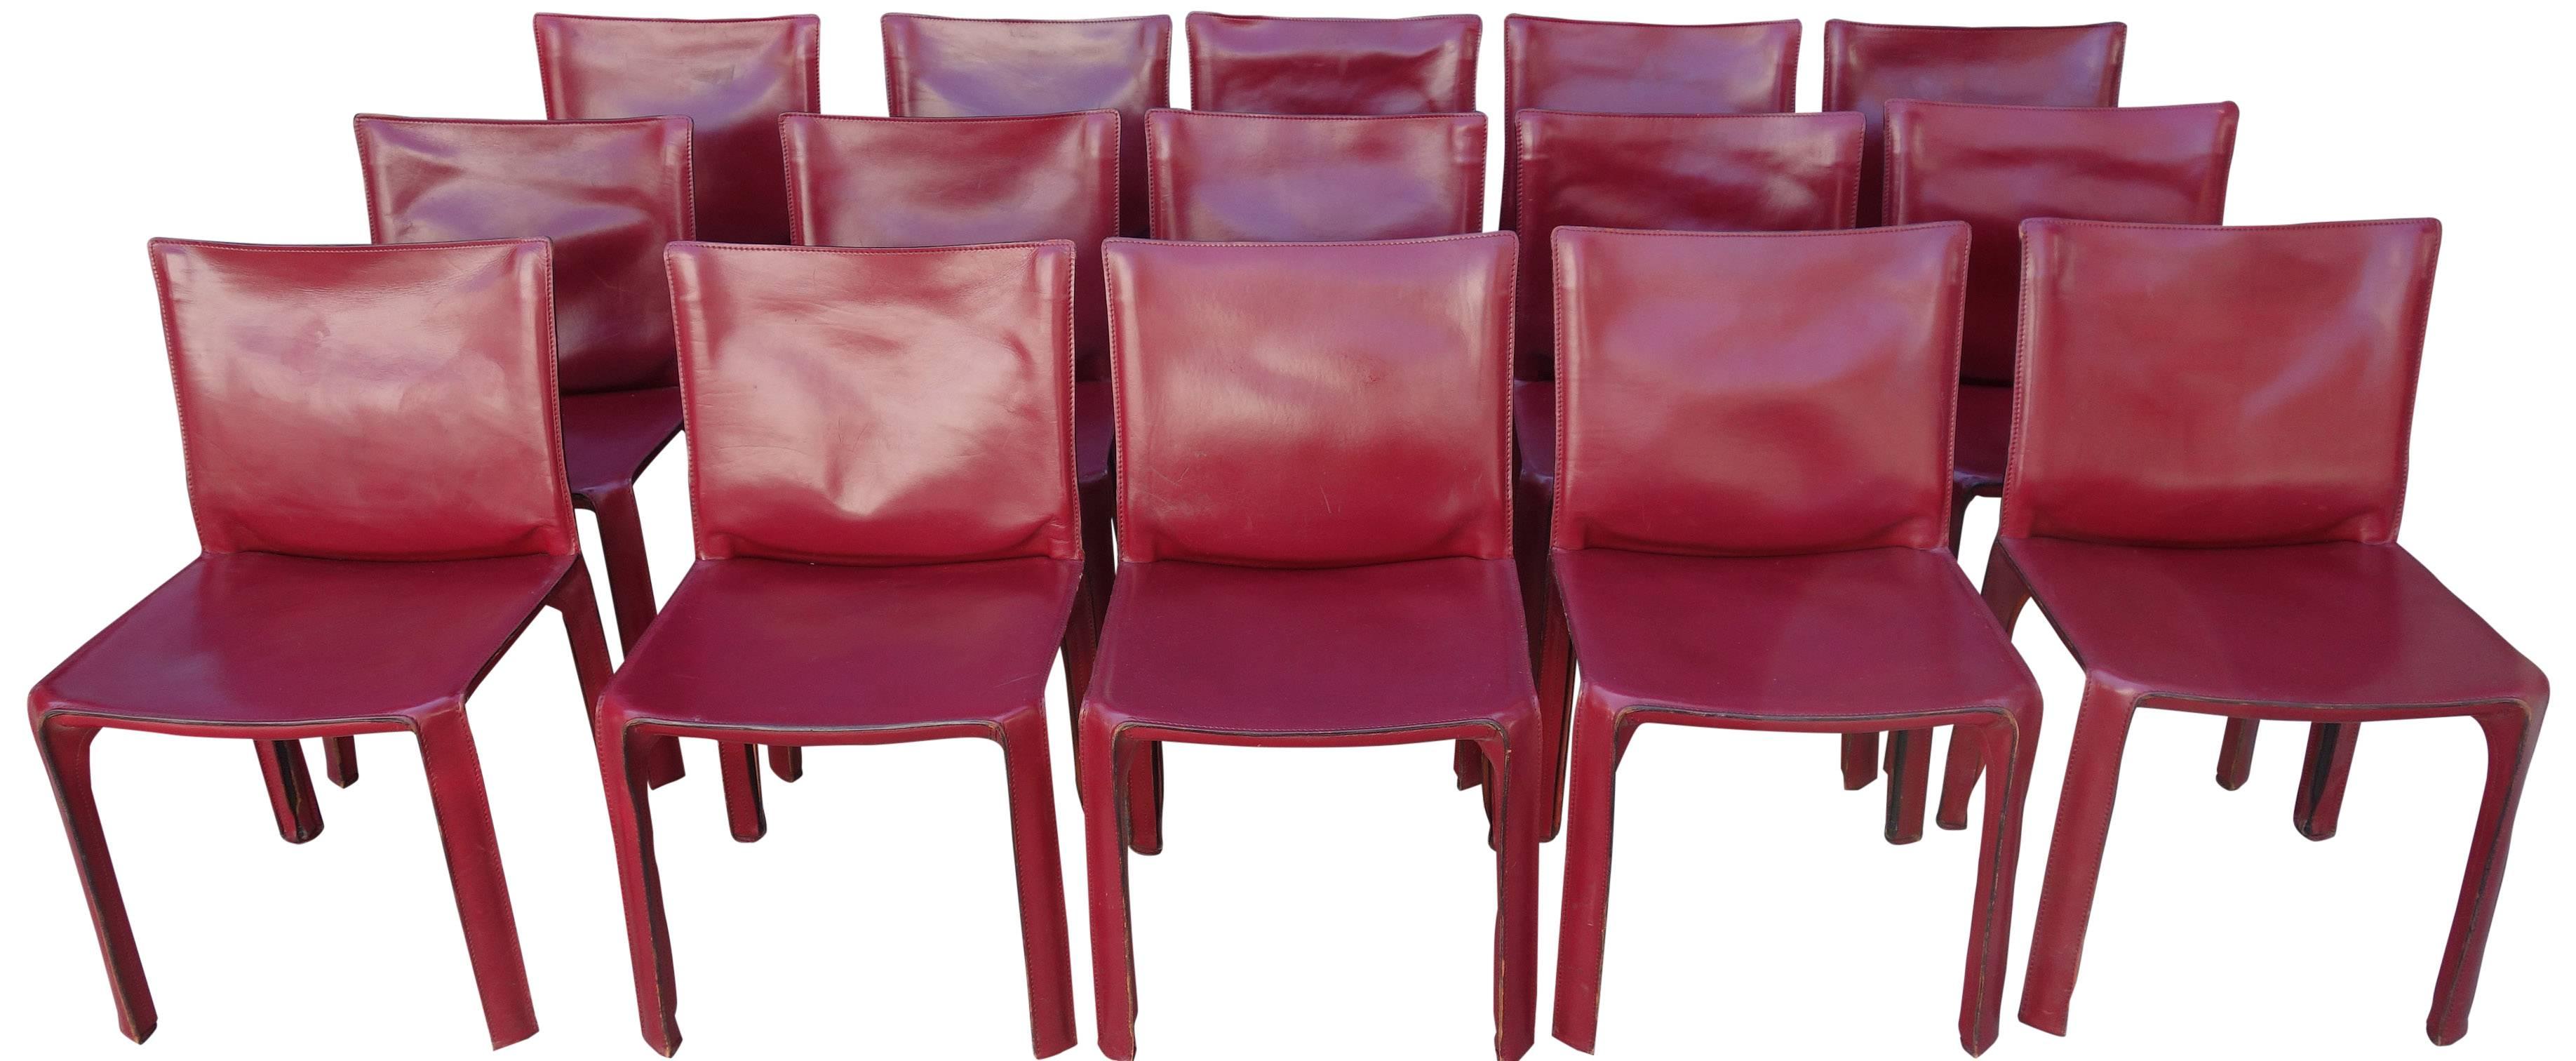 Mid-Century Modern Midcentury Cassina Cab Chairs by Mario Bellini